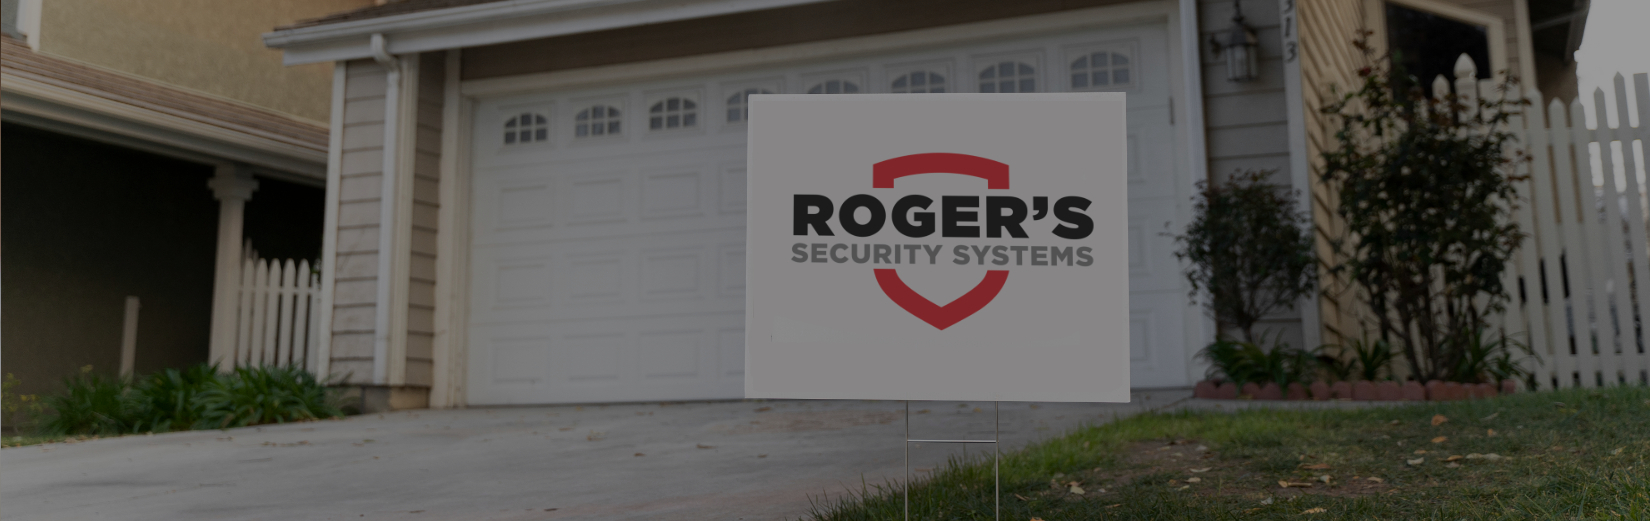 Sahw Rogers Home Security sign in front of esidential home